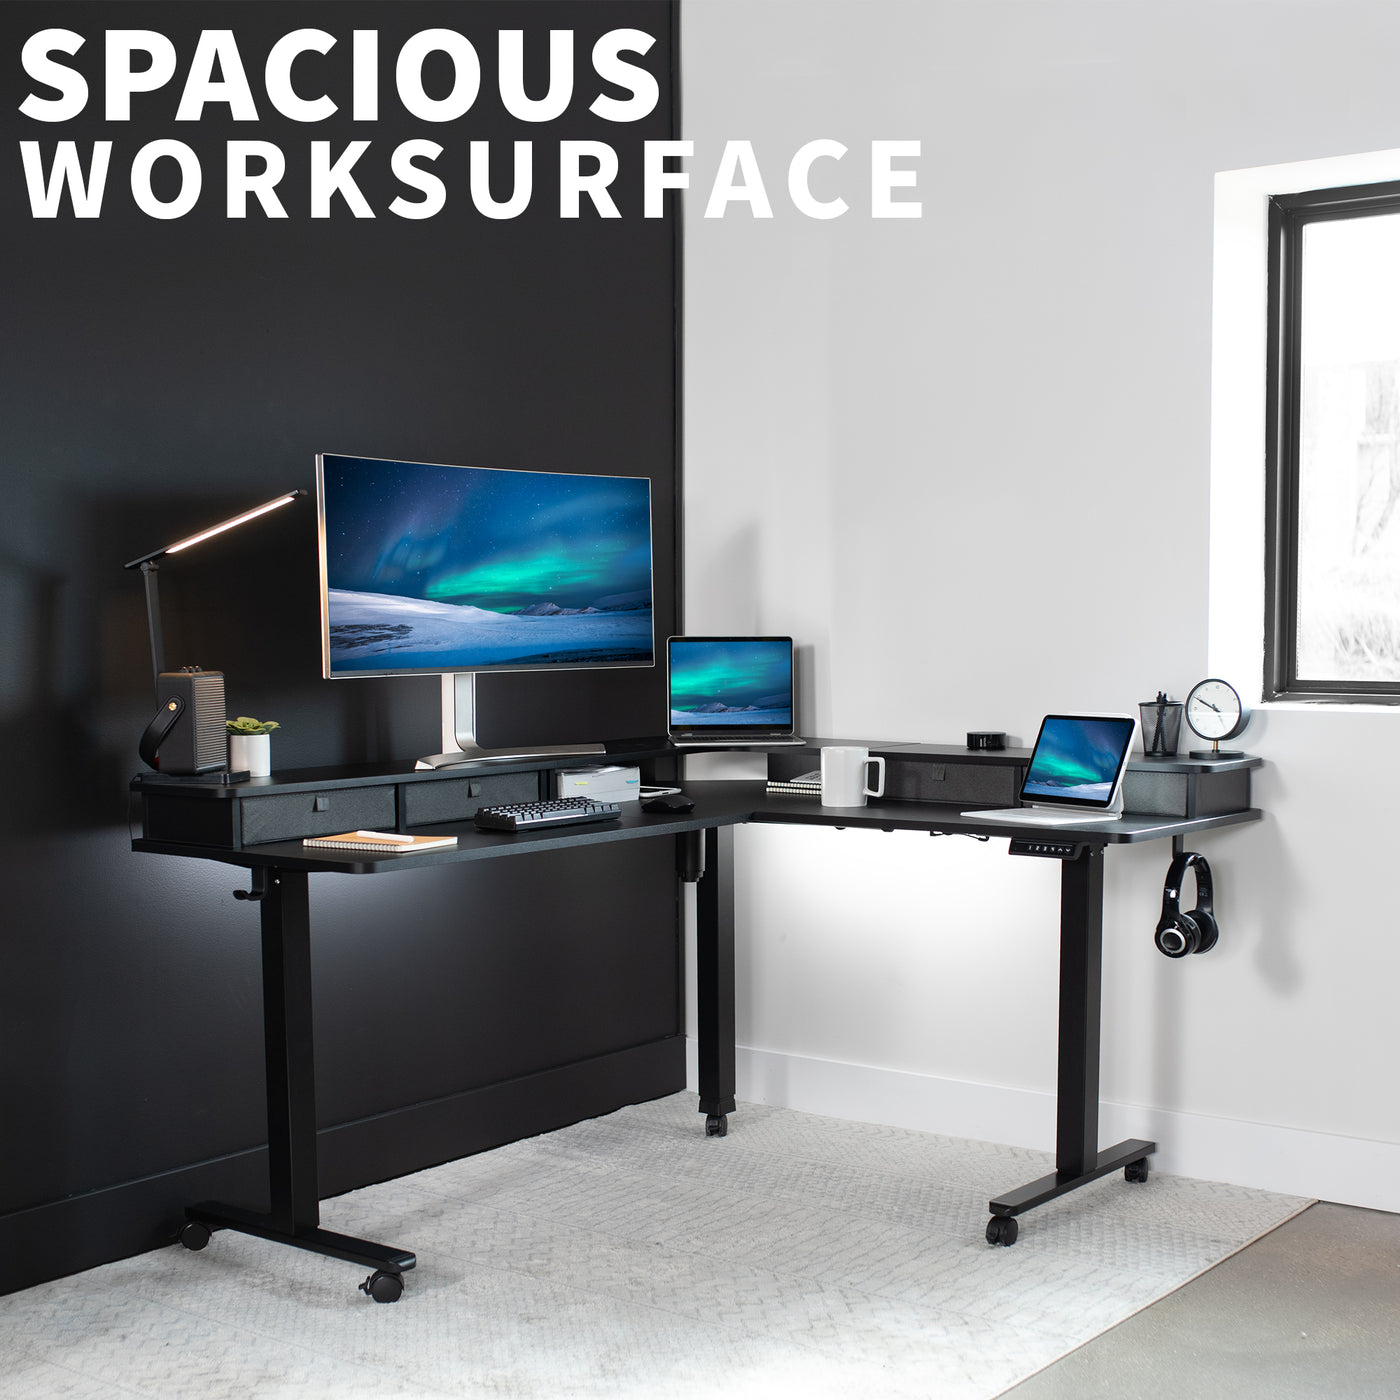 Spacious workstation surface with built-in shelving supporting multiple monitors.